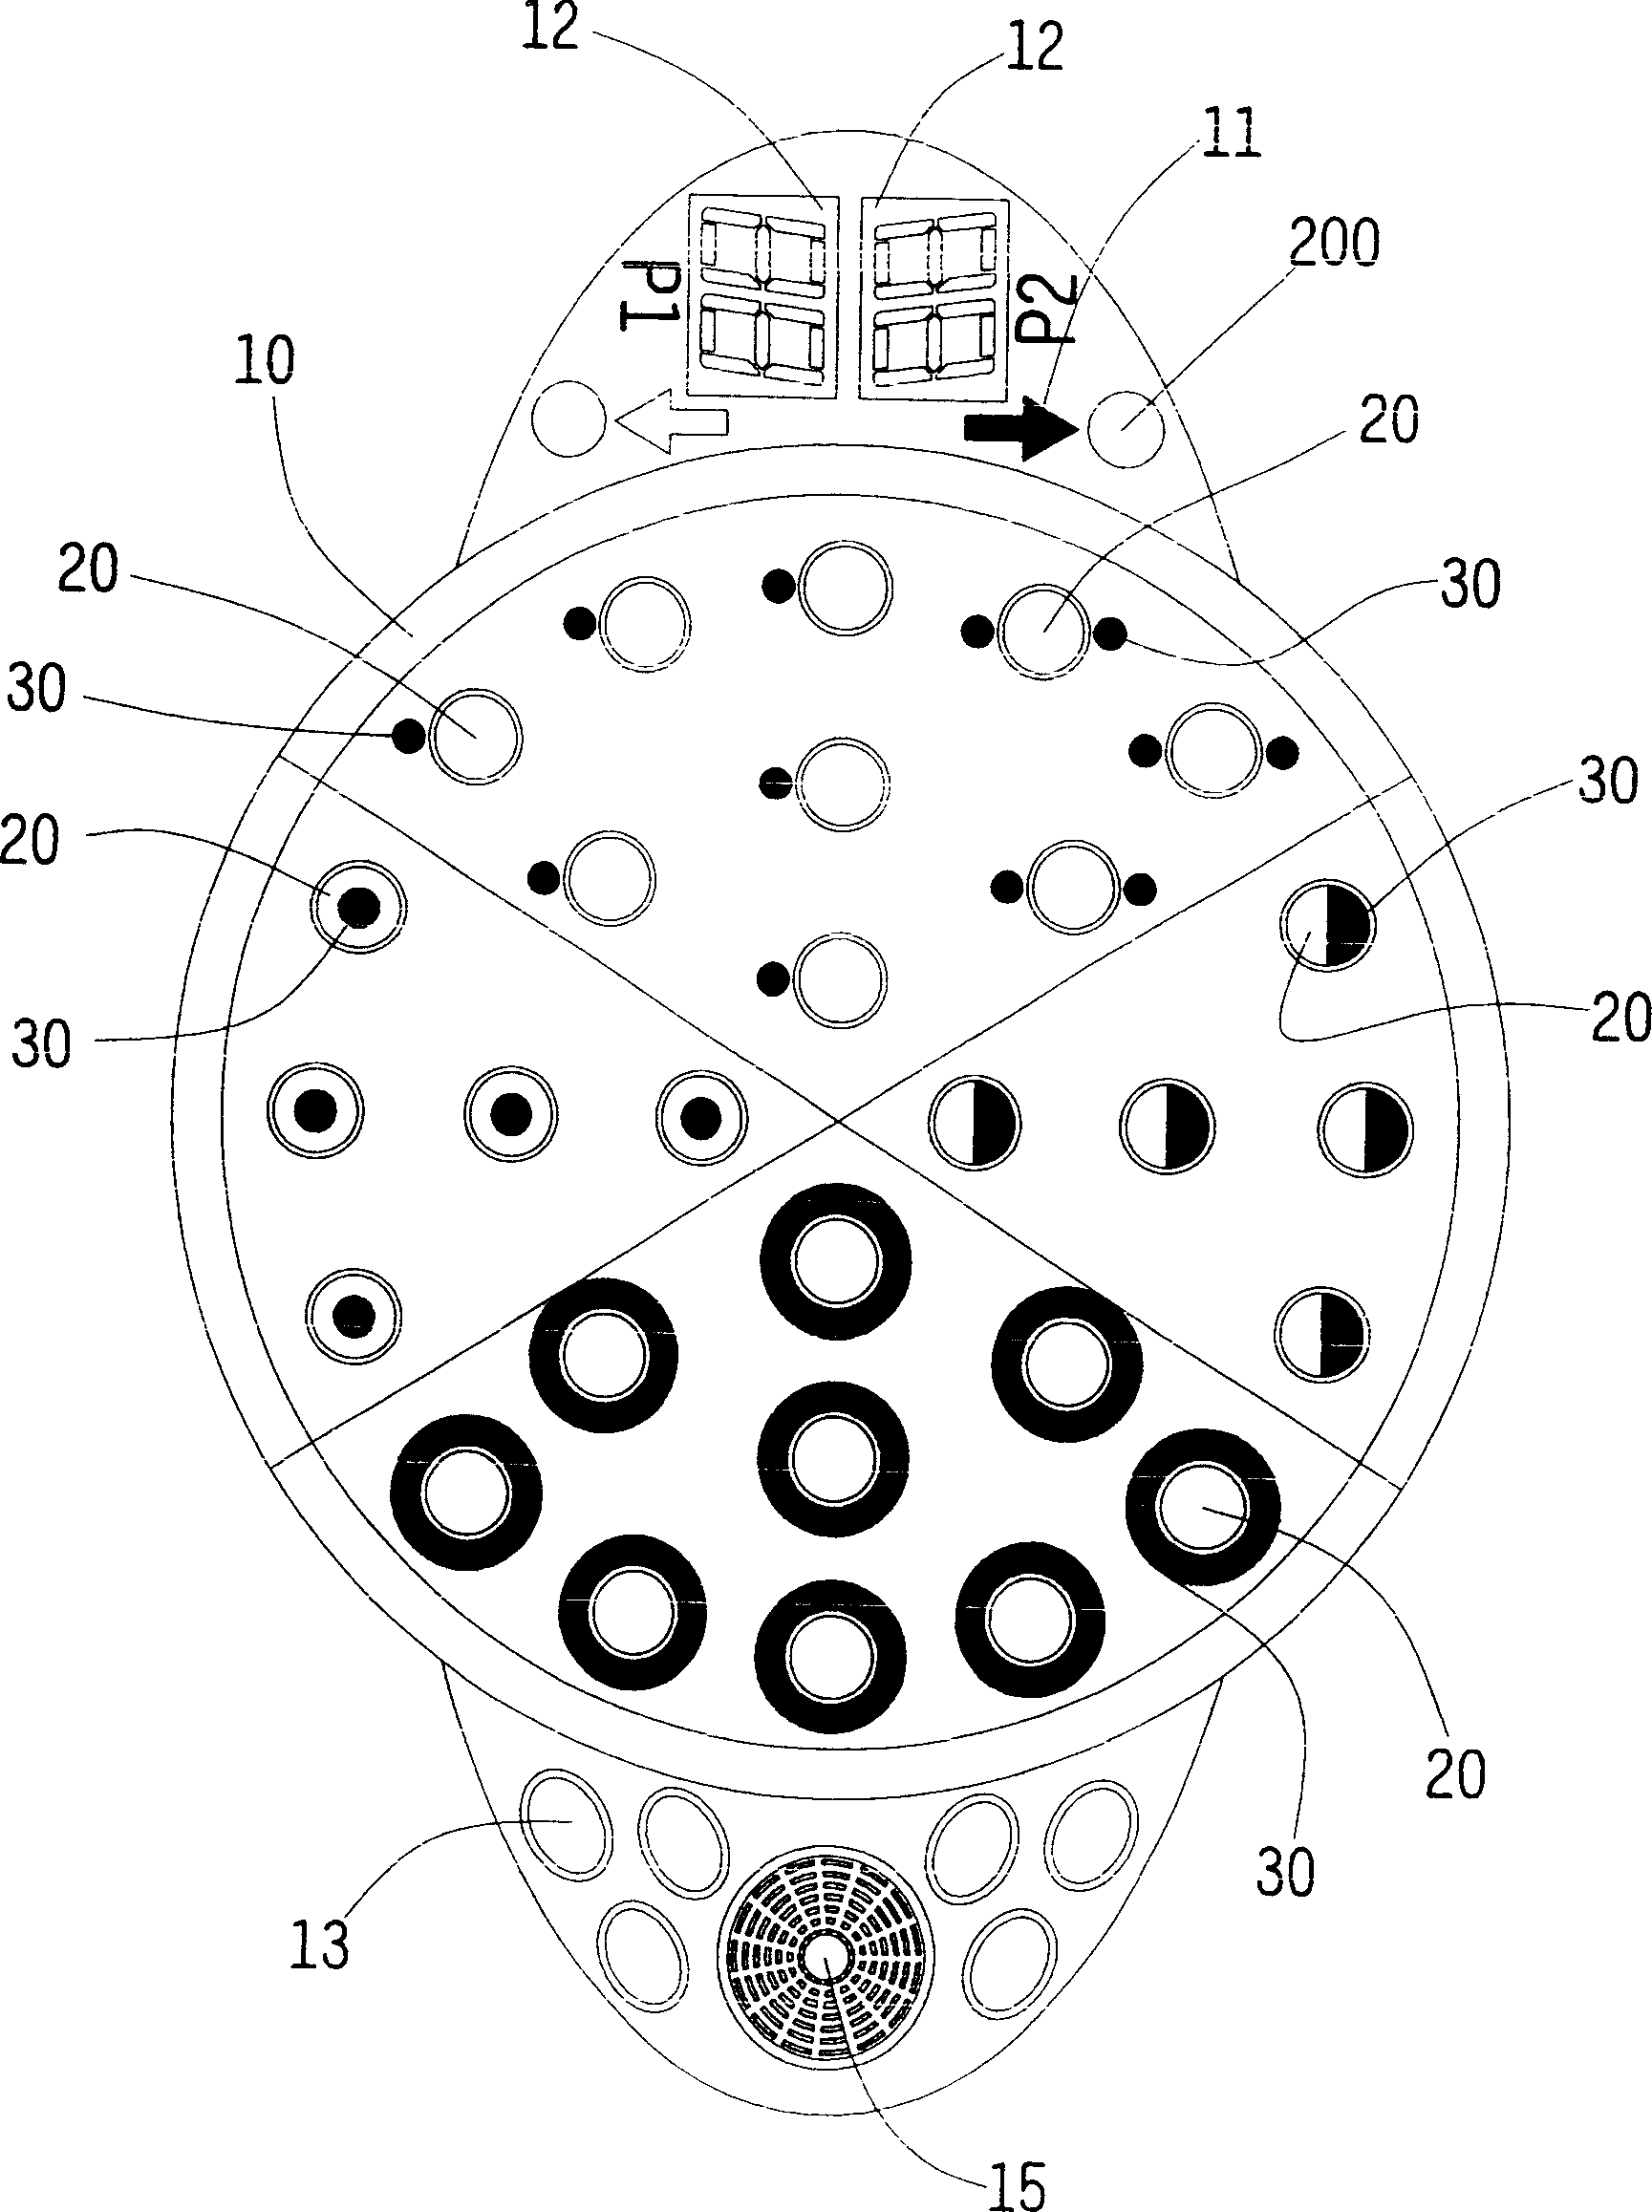 Structure of game of electronic type chessboard